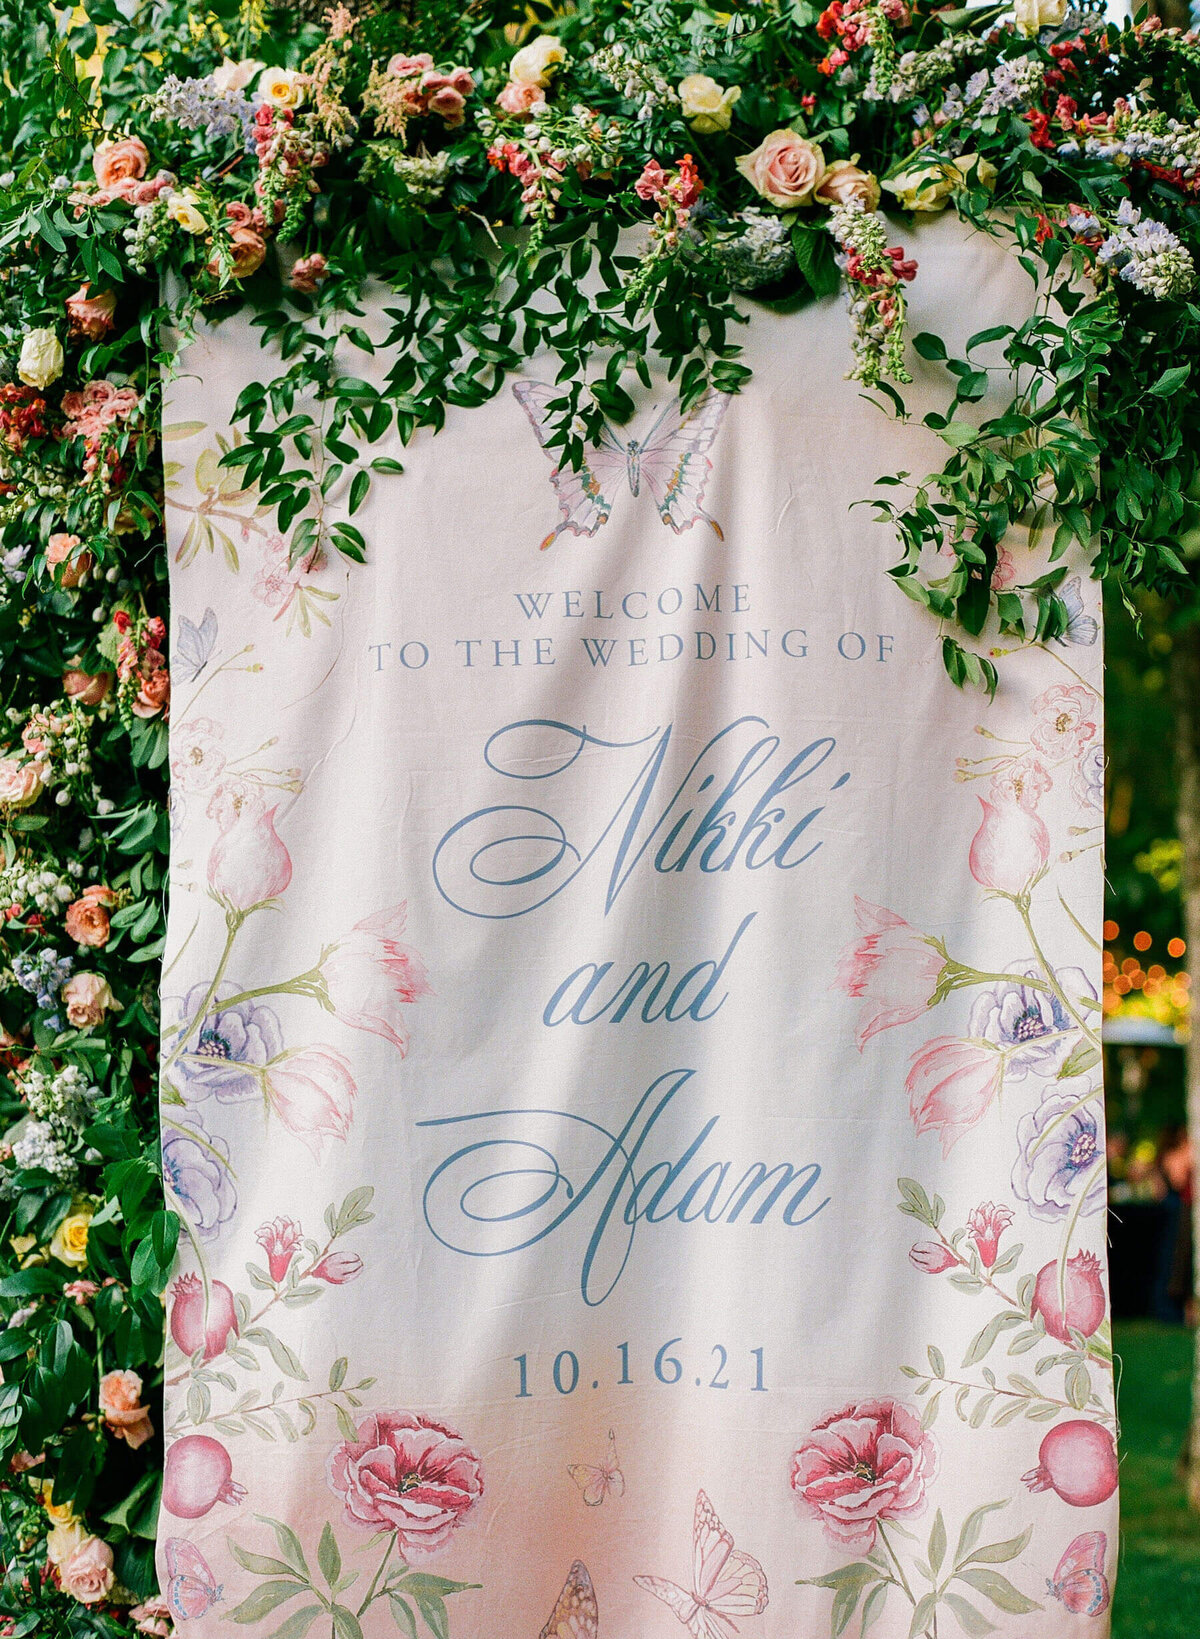 Printed Welcome sign hanging in tree surrounded with fresh pastel flowers.